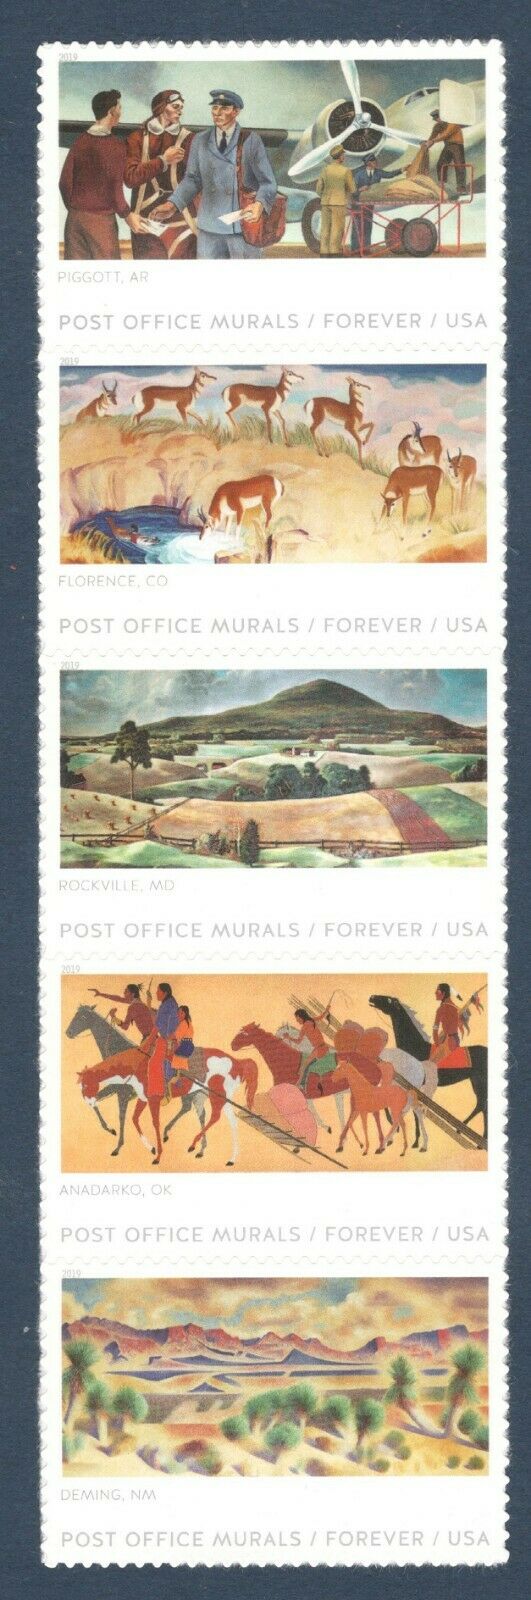 5372-6 Forever  Post Office Murals Mint Strip of 5 #5372-6strip